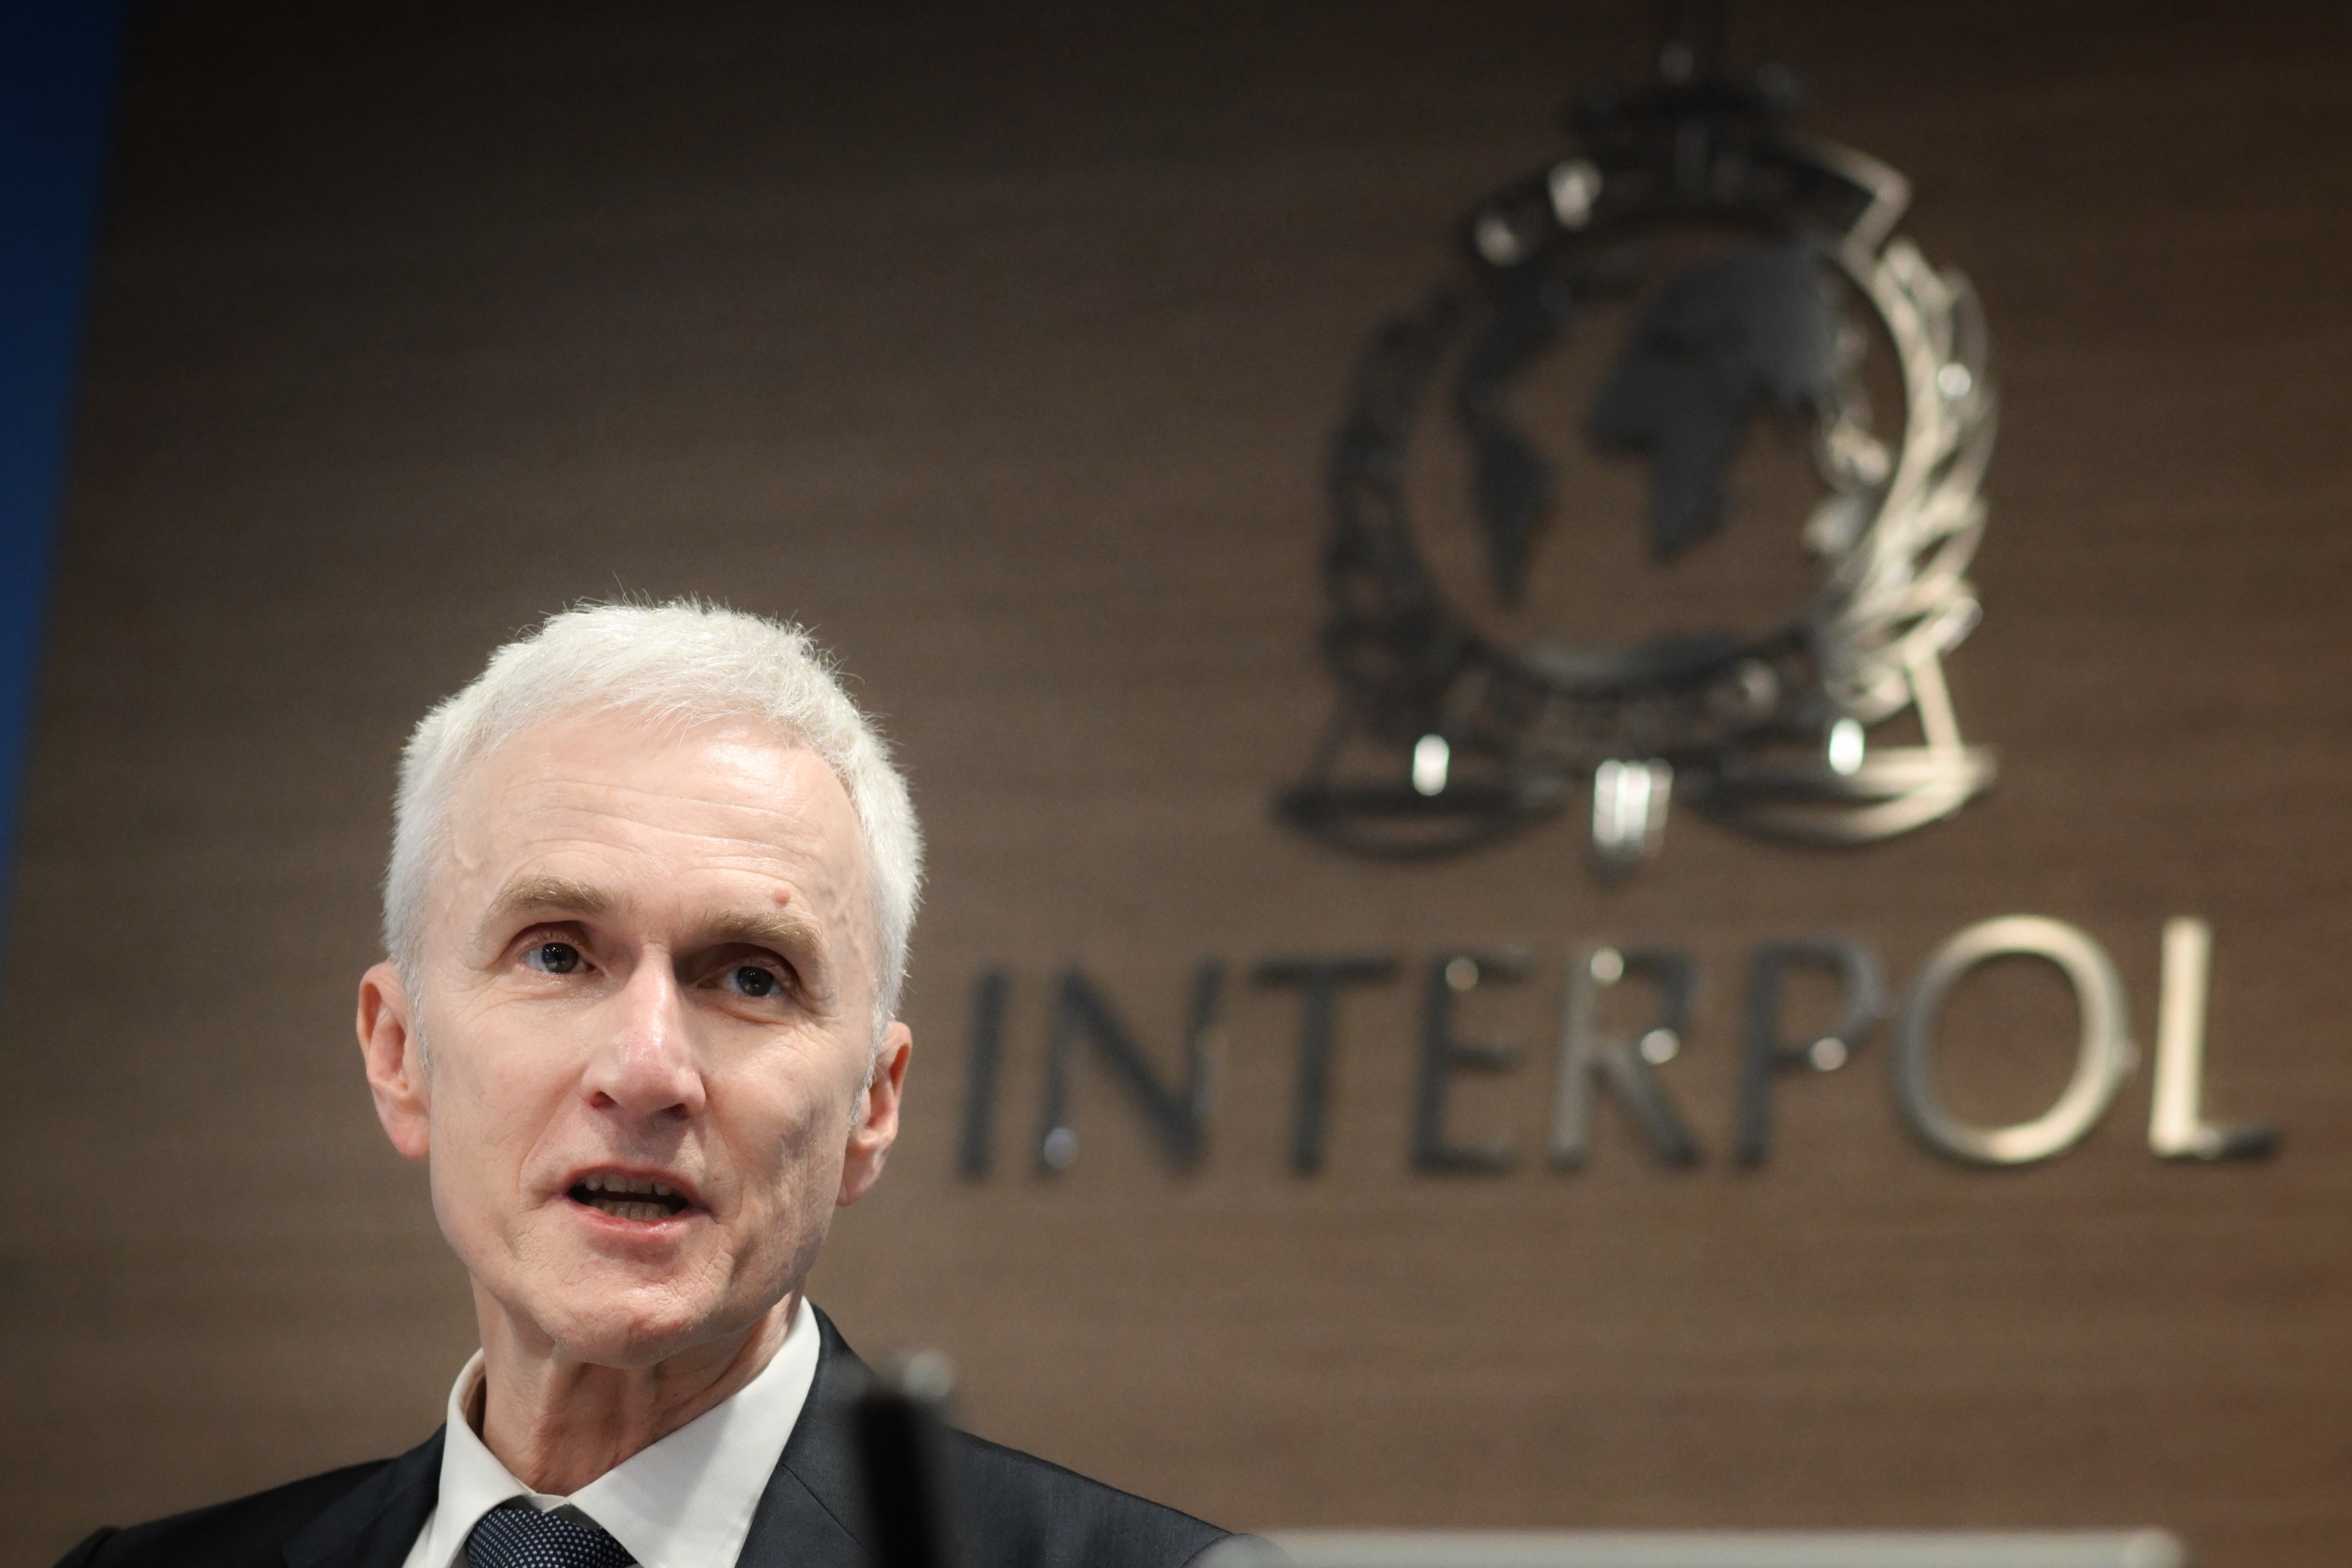 Singapore’s anti-scam efforts are a model for tackling ‘epidemic’: Interpol chief